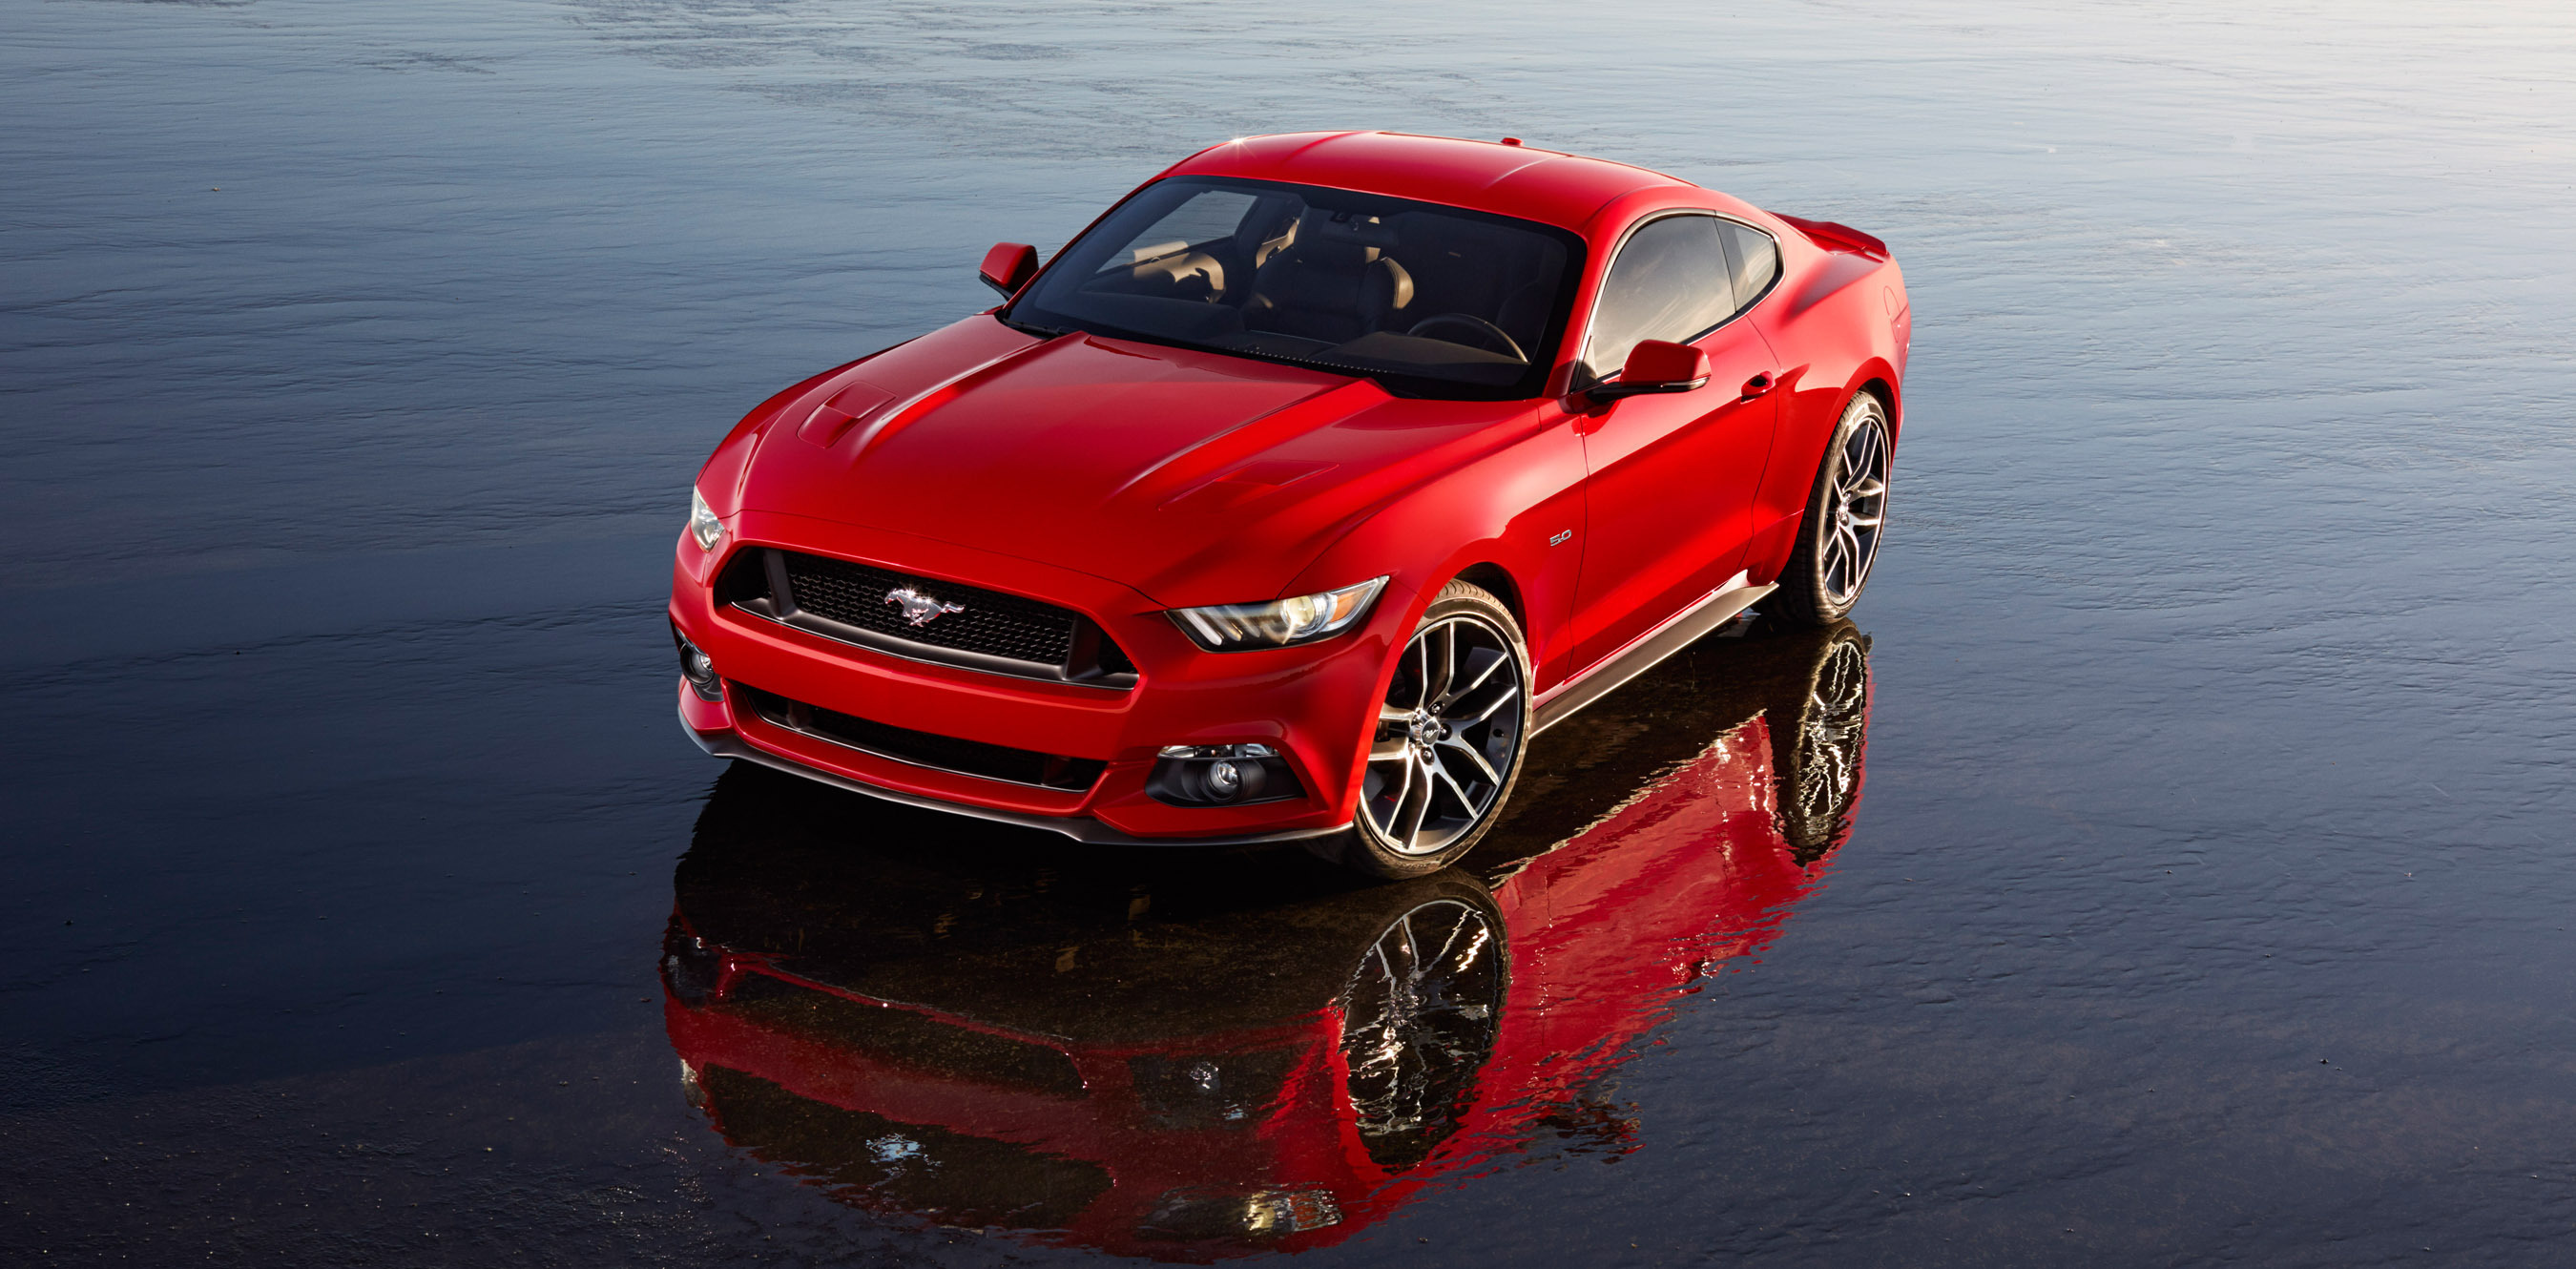 All-new Ford Mustang. (PRNewsFoto/Ford Motor Company) (PRNewsFoto/FORD MOTOR COMPANY)